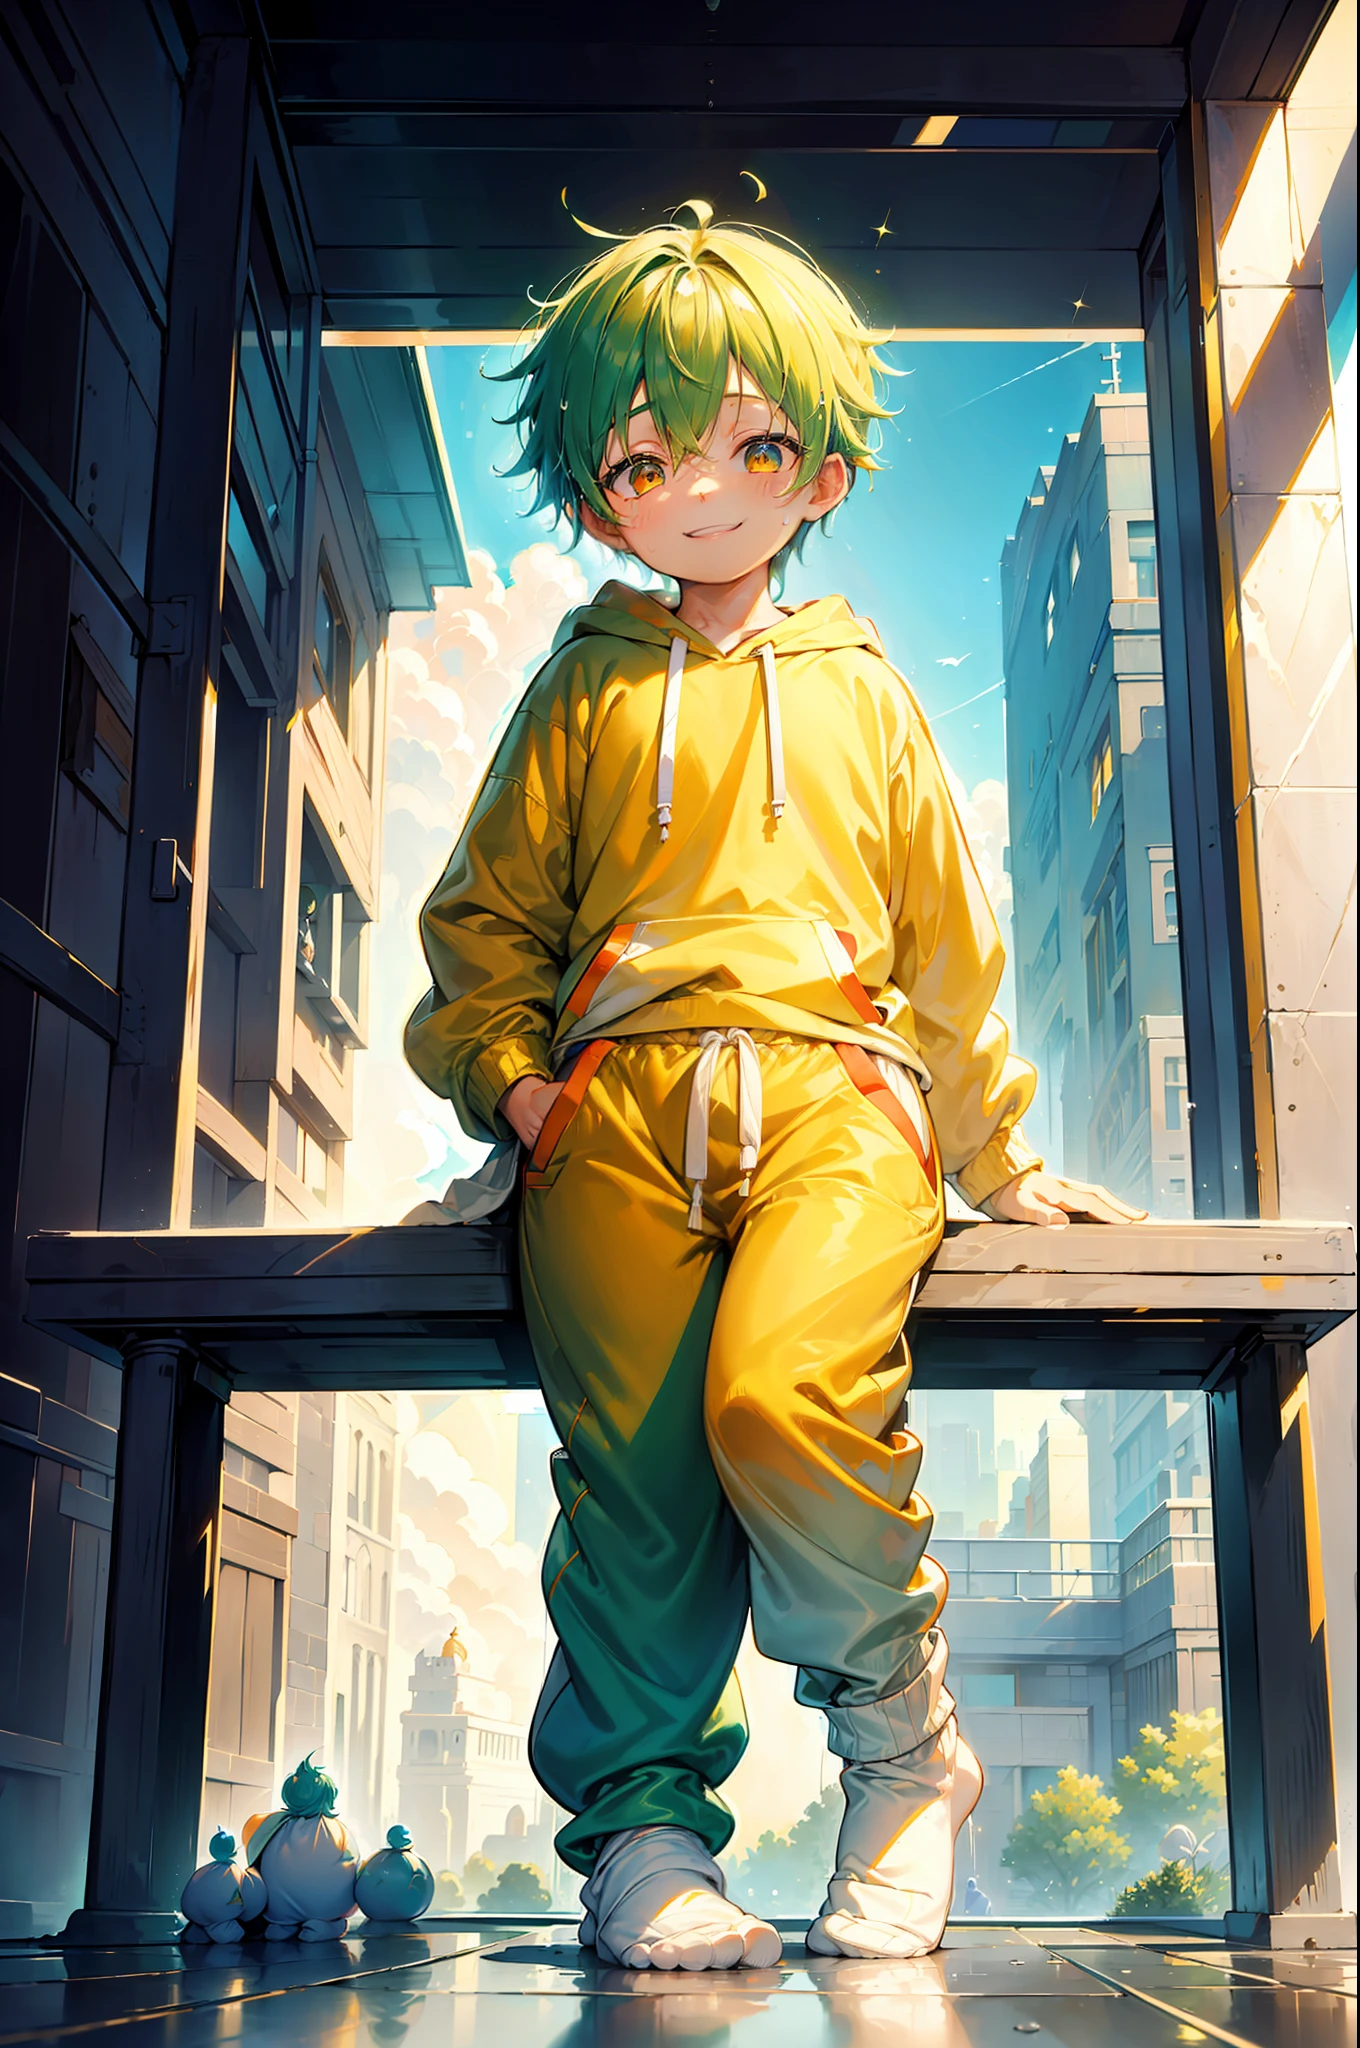 Masterpiece, chubby Little boy with green hair and shiny bright orange colored eyes and small socks wearing a hoodie, and oversized sweatpants sitting in a his room, raining outside window, young, boy, , small, toddler, soft light, (sweatpants:1.4), (undersized socks:1.4), (Boy:1.4), (Shota:1.4), (Young:1.4), (Male:1.4), (smiling:1.4), (foot:1.4), (shy:1.4), (pastel:1.0), (colors:1.0), (cute colors:1.0), (divine:1.0),